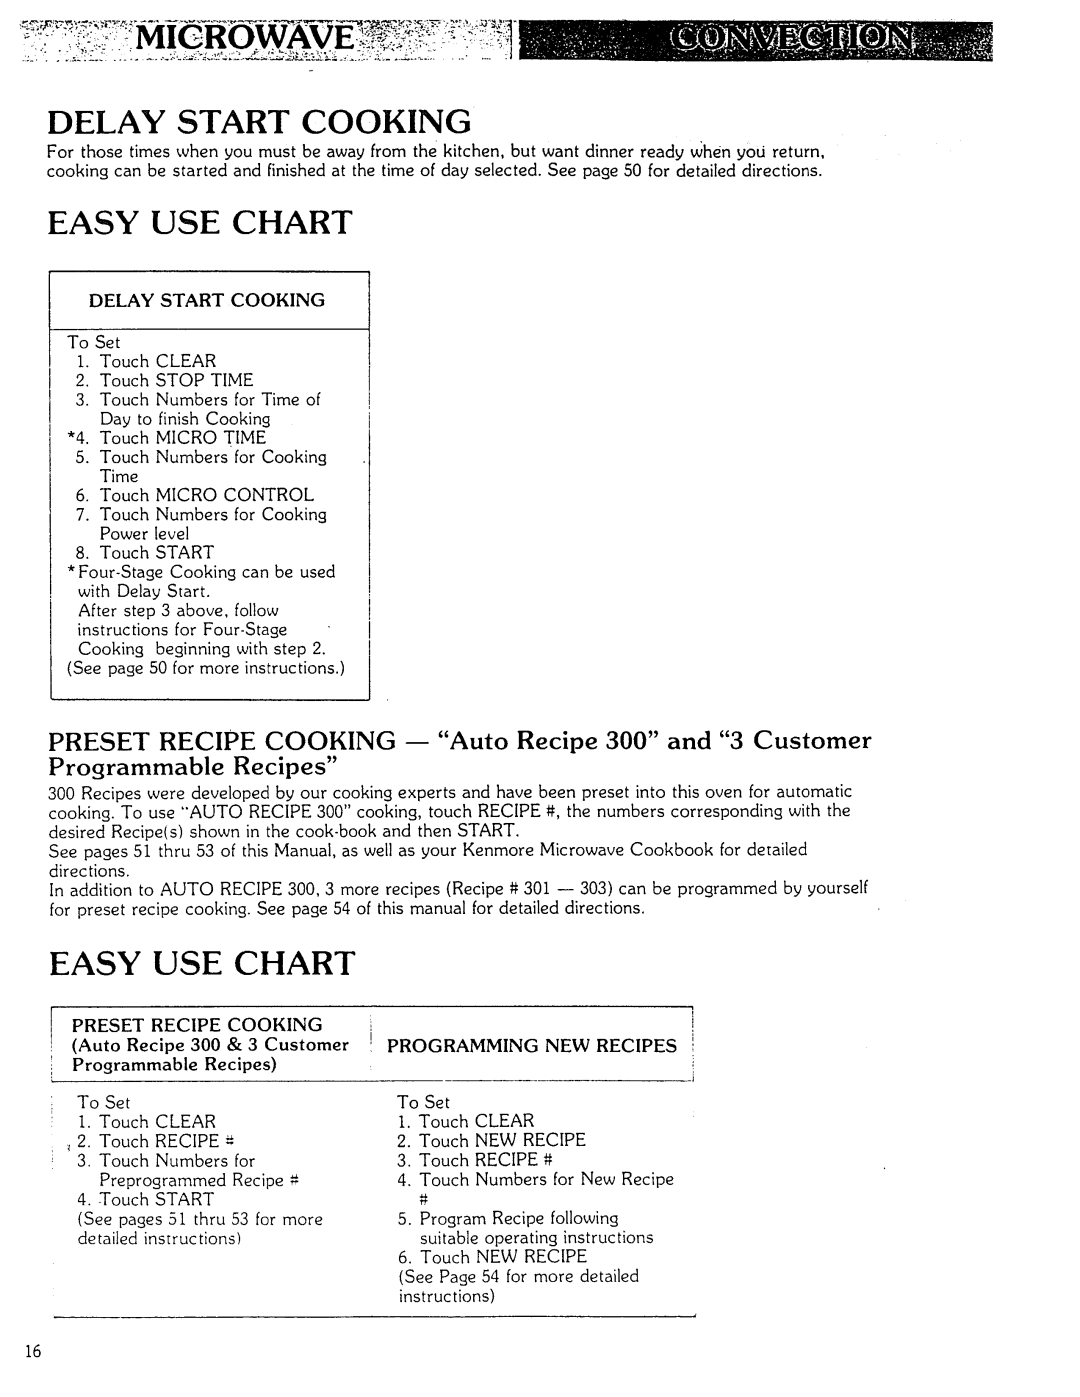 Kenmore Microwave Oven manual Delay Start Cooking, Easy Use Chart, Programmable Recipes 